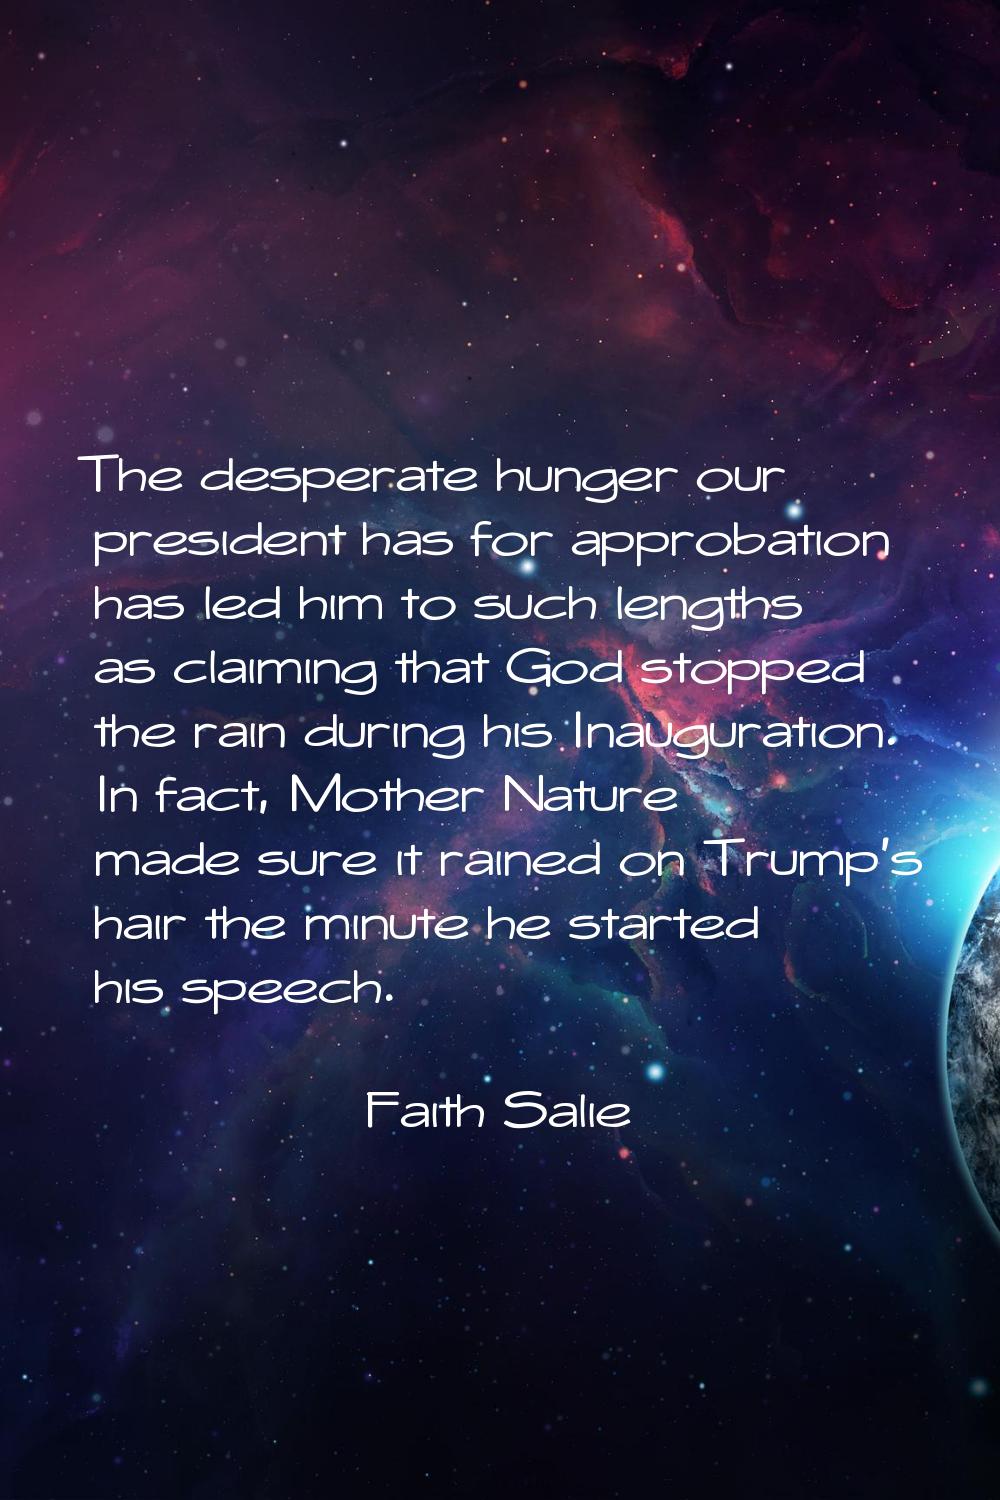 The desperate hunger our president has for approbation has led him to such lengths as claiming that